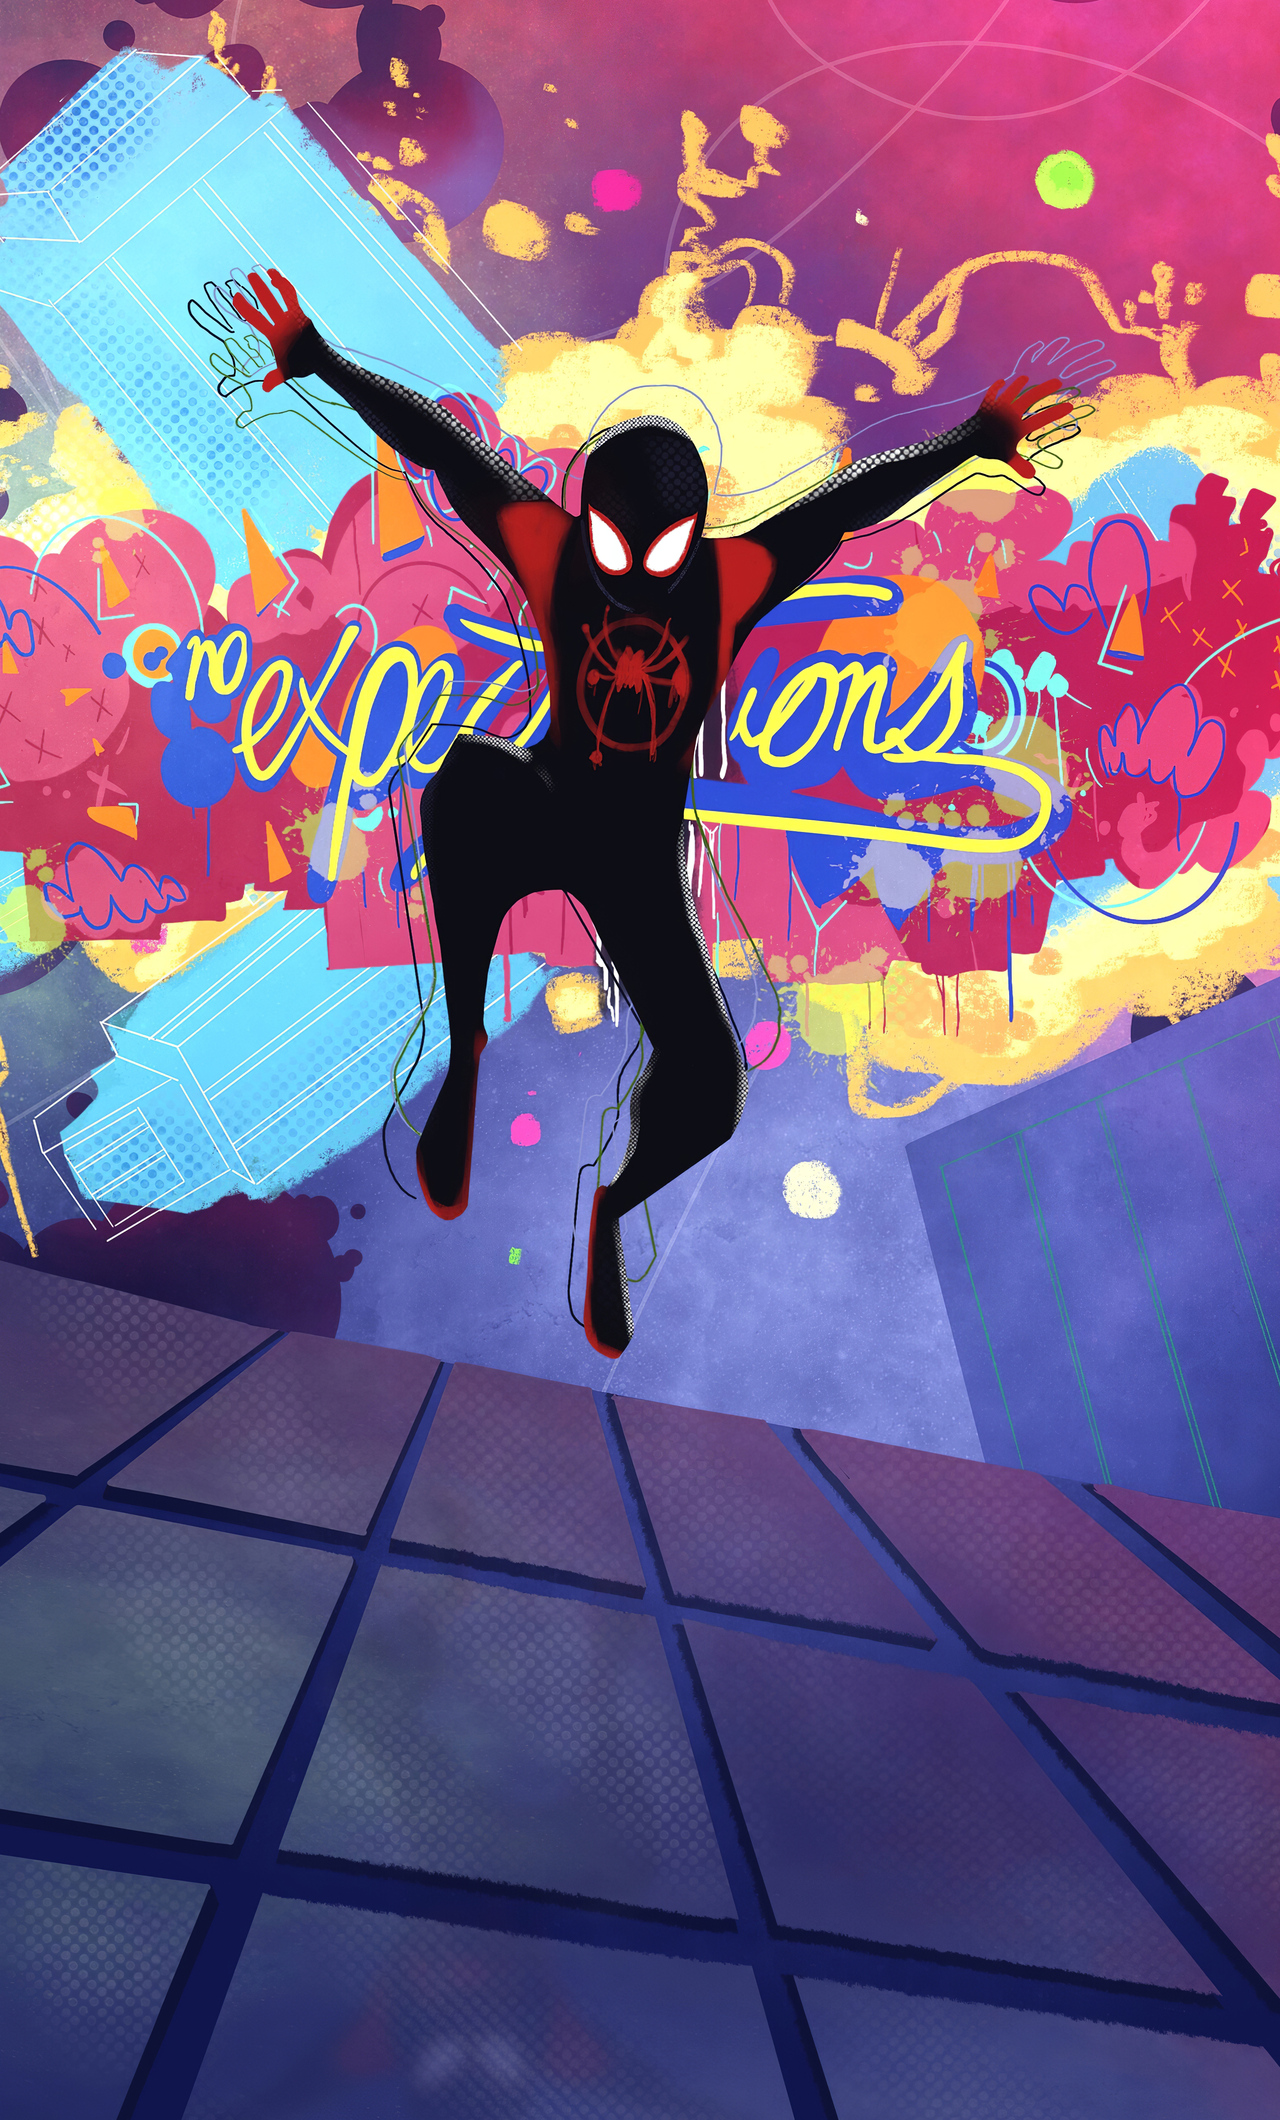 Spider Man Into The Spider Verse iPhone HD Wallpapers - Wallpaper Cave